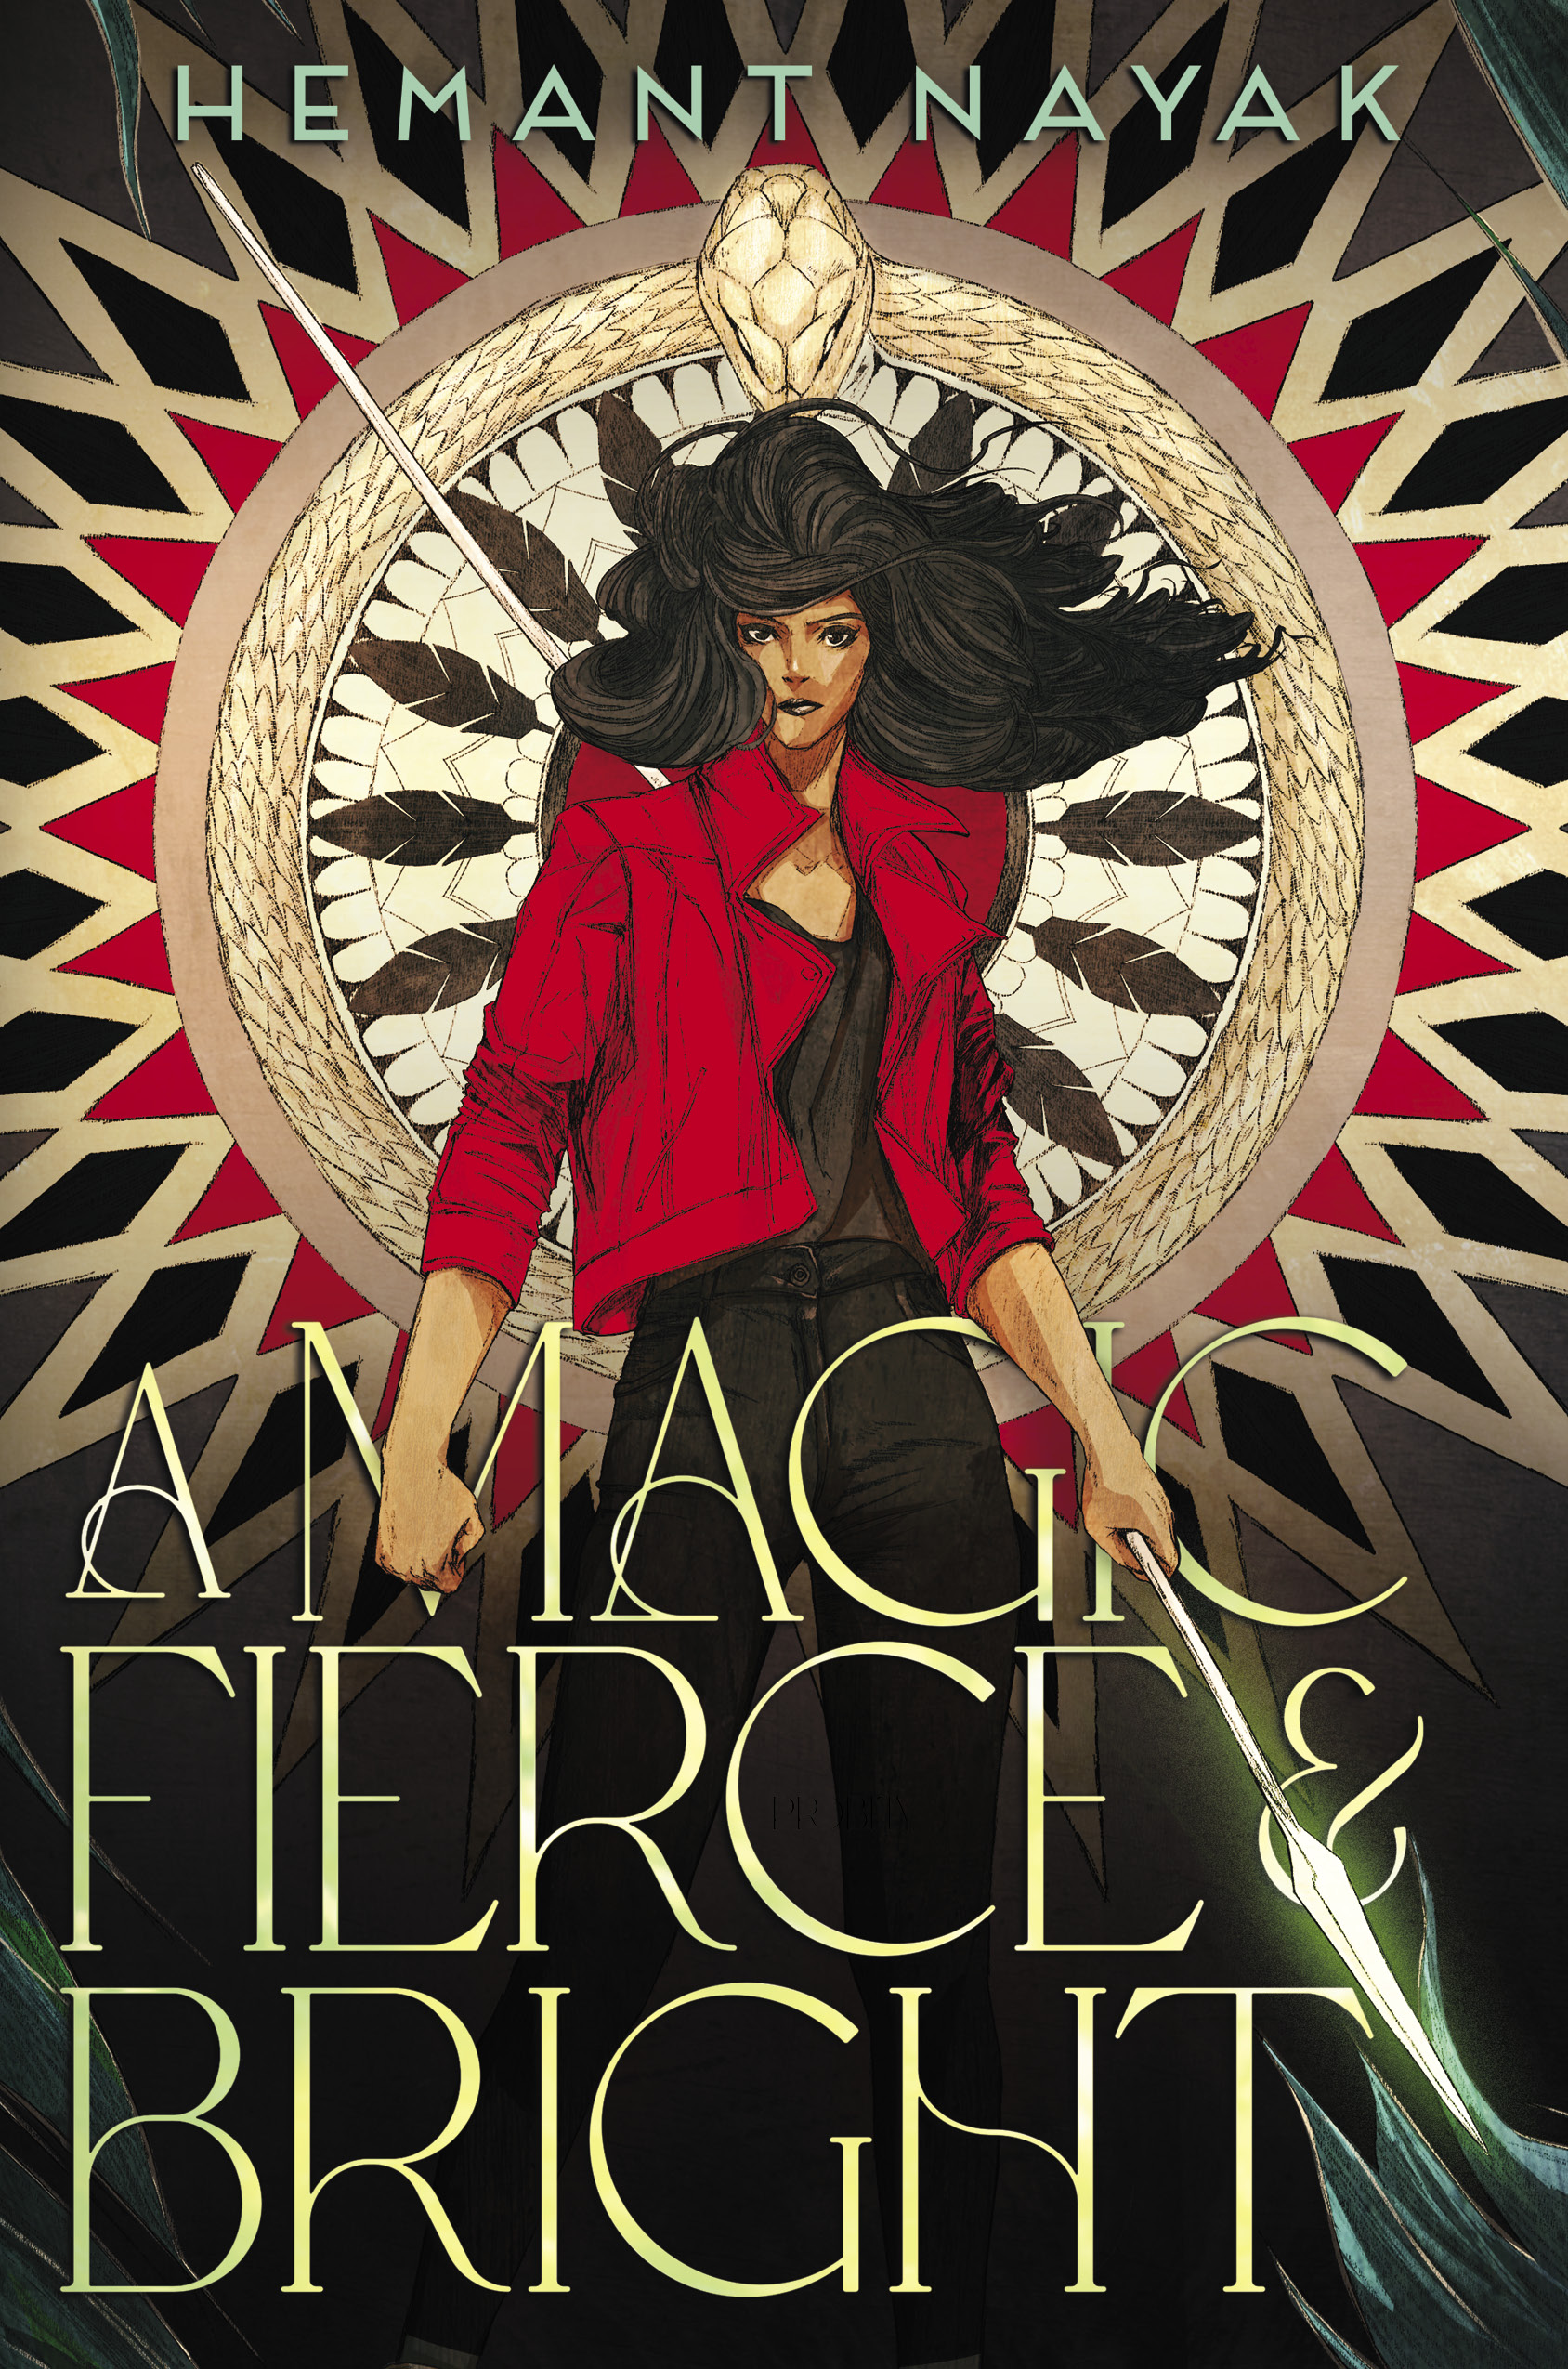 Author Chat with Hemant Nayak (A Magic Fierce and Bright), Plus Giveaway~ US ONLY (No P.O. Boxes)!